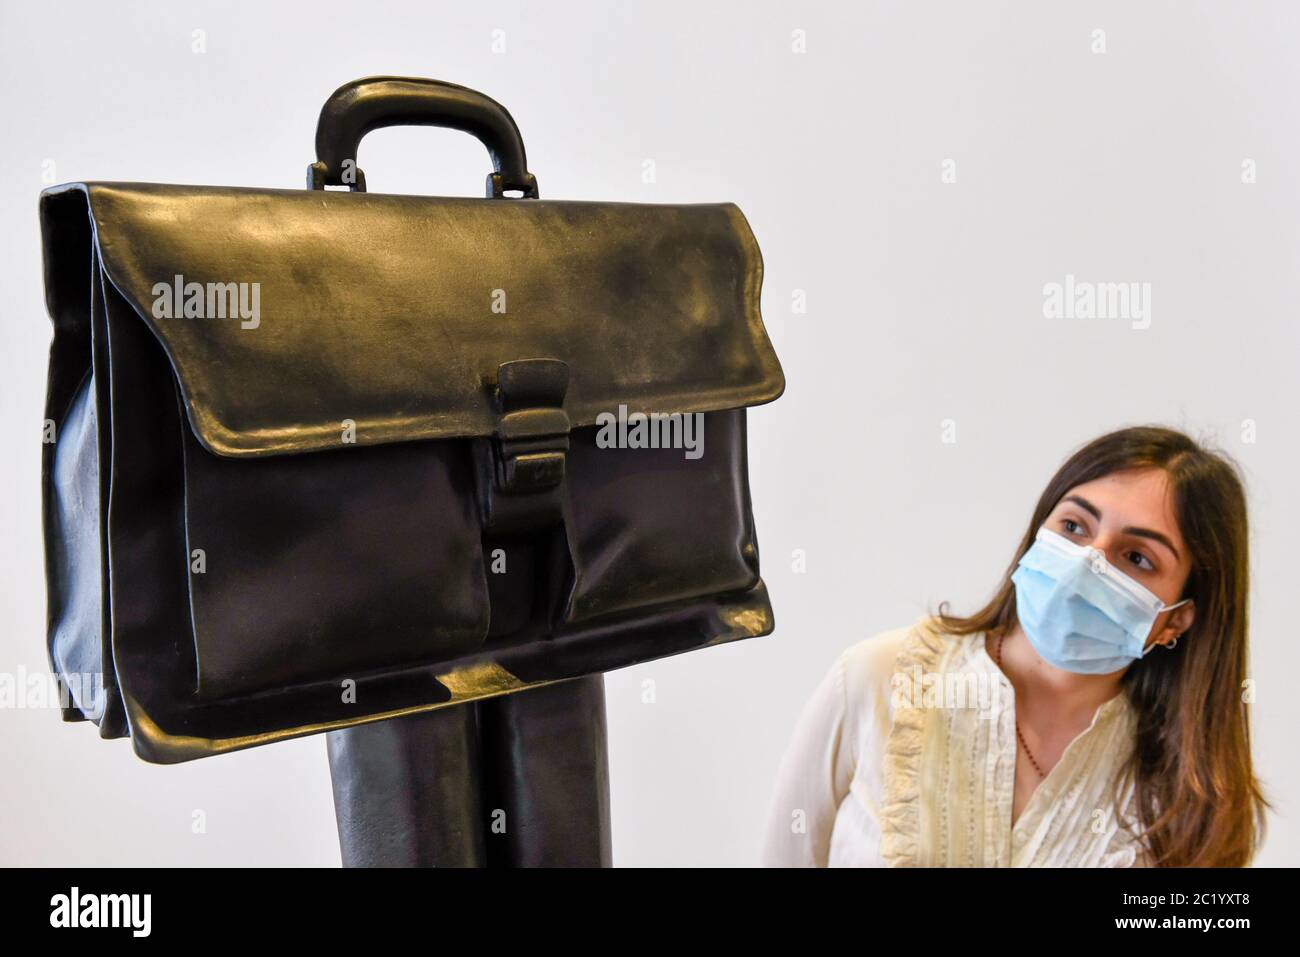 London, UK.  16 June 2020.  A staff member wearing a facemask views 'Direktor (Herrentasche) (Taschenskulpturen)', 2019, by Erwin Wurm on the opening day of a new exhibition 'Art Basel at Ely House' taking place at Galerie Thaddaeus Ropac in Mayfair.  The commercial gallery has implemented social distancing guidelines for visitors for its reopening after coronavirus pandemic lockdown restrictions were relaxed by the UK government.  The exhibition runs 16 June to 31 July 2020.  Credit: Stephen Chung / Alamy Live News Stock Photo